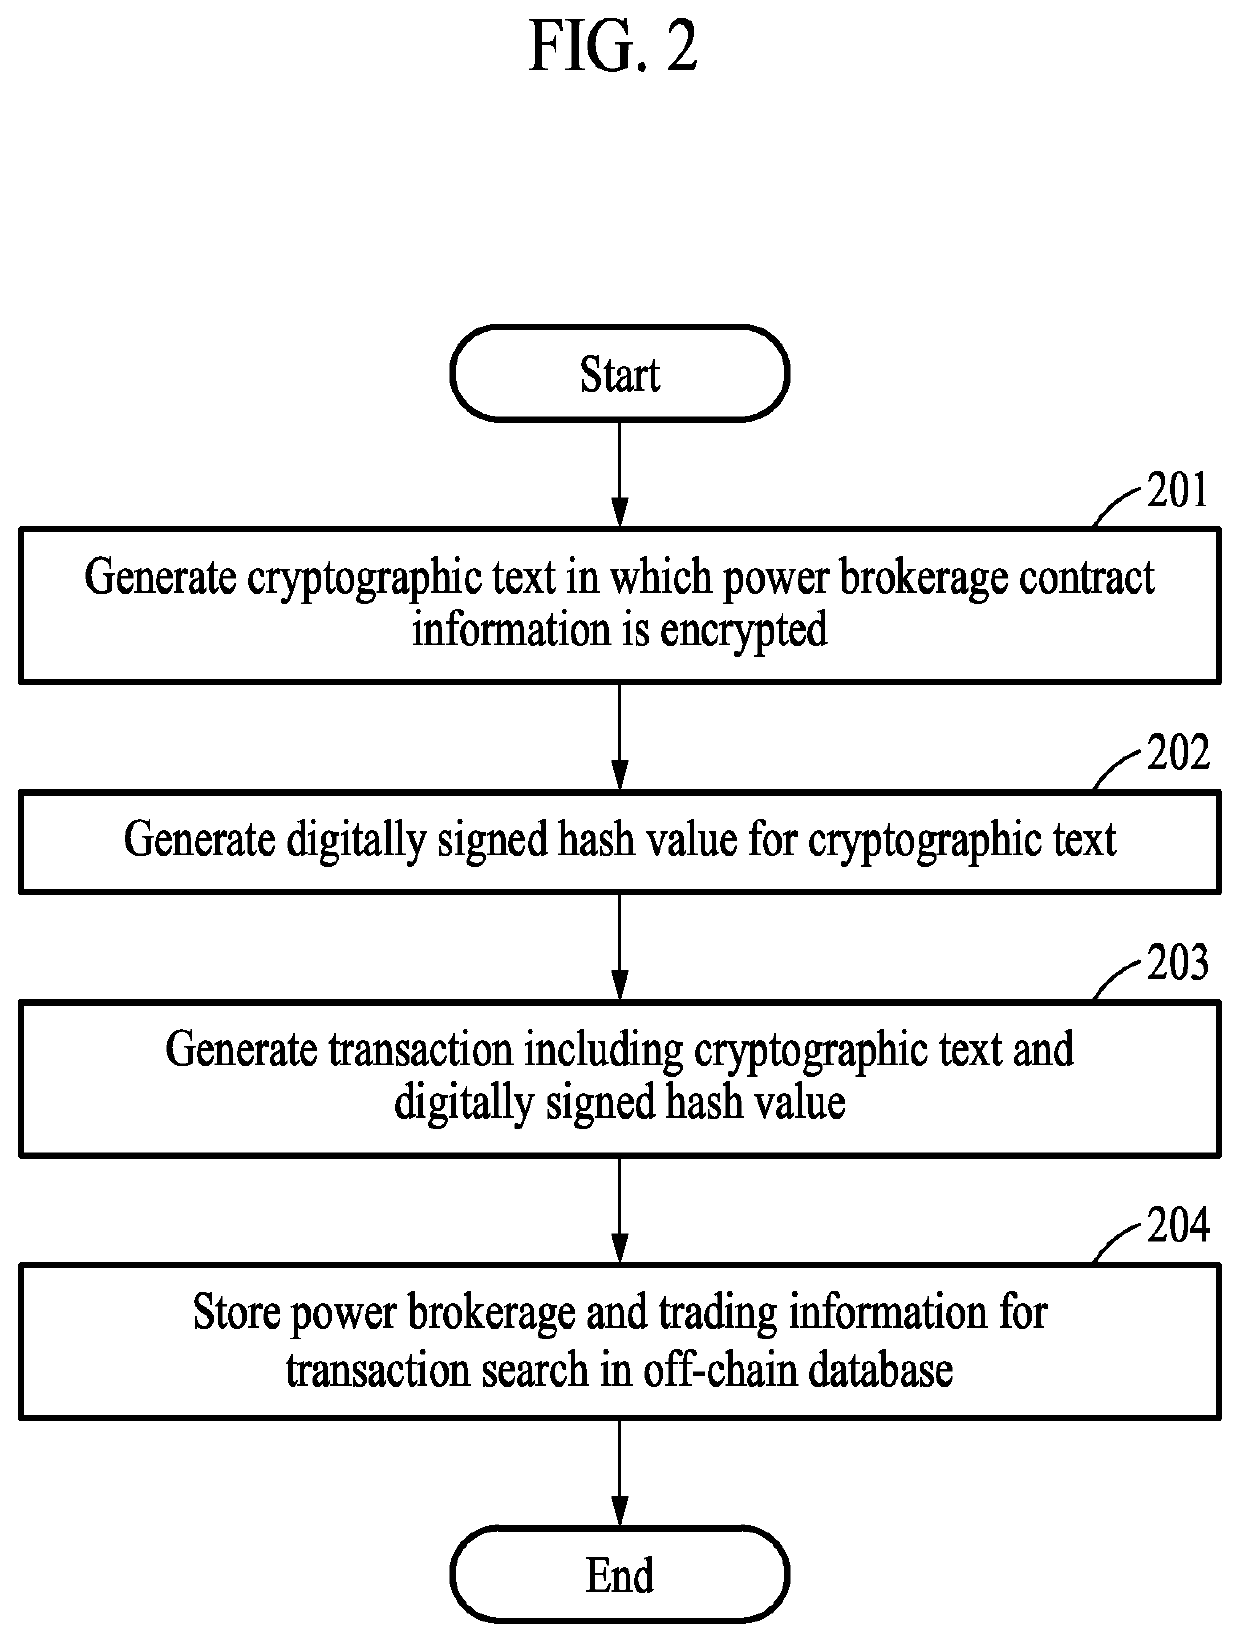 Electric power brokerage method and system with enhanced data confidentiality and integrity based on blockchain